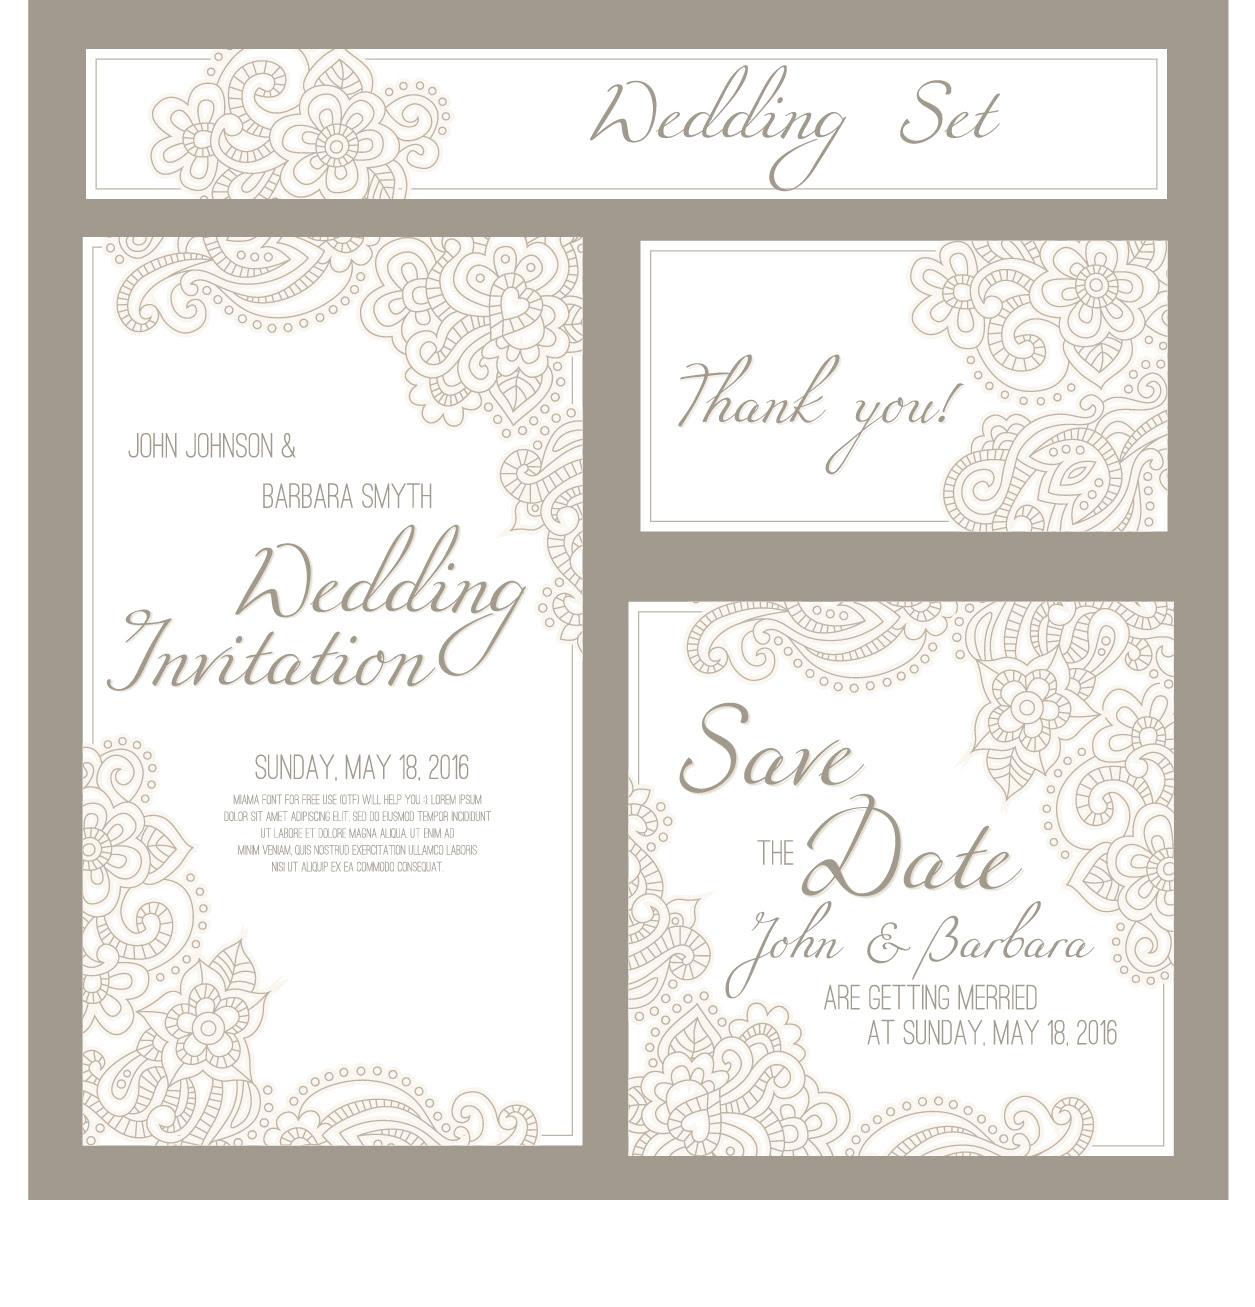  Wedding invitation card with banner vector free download